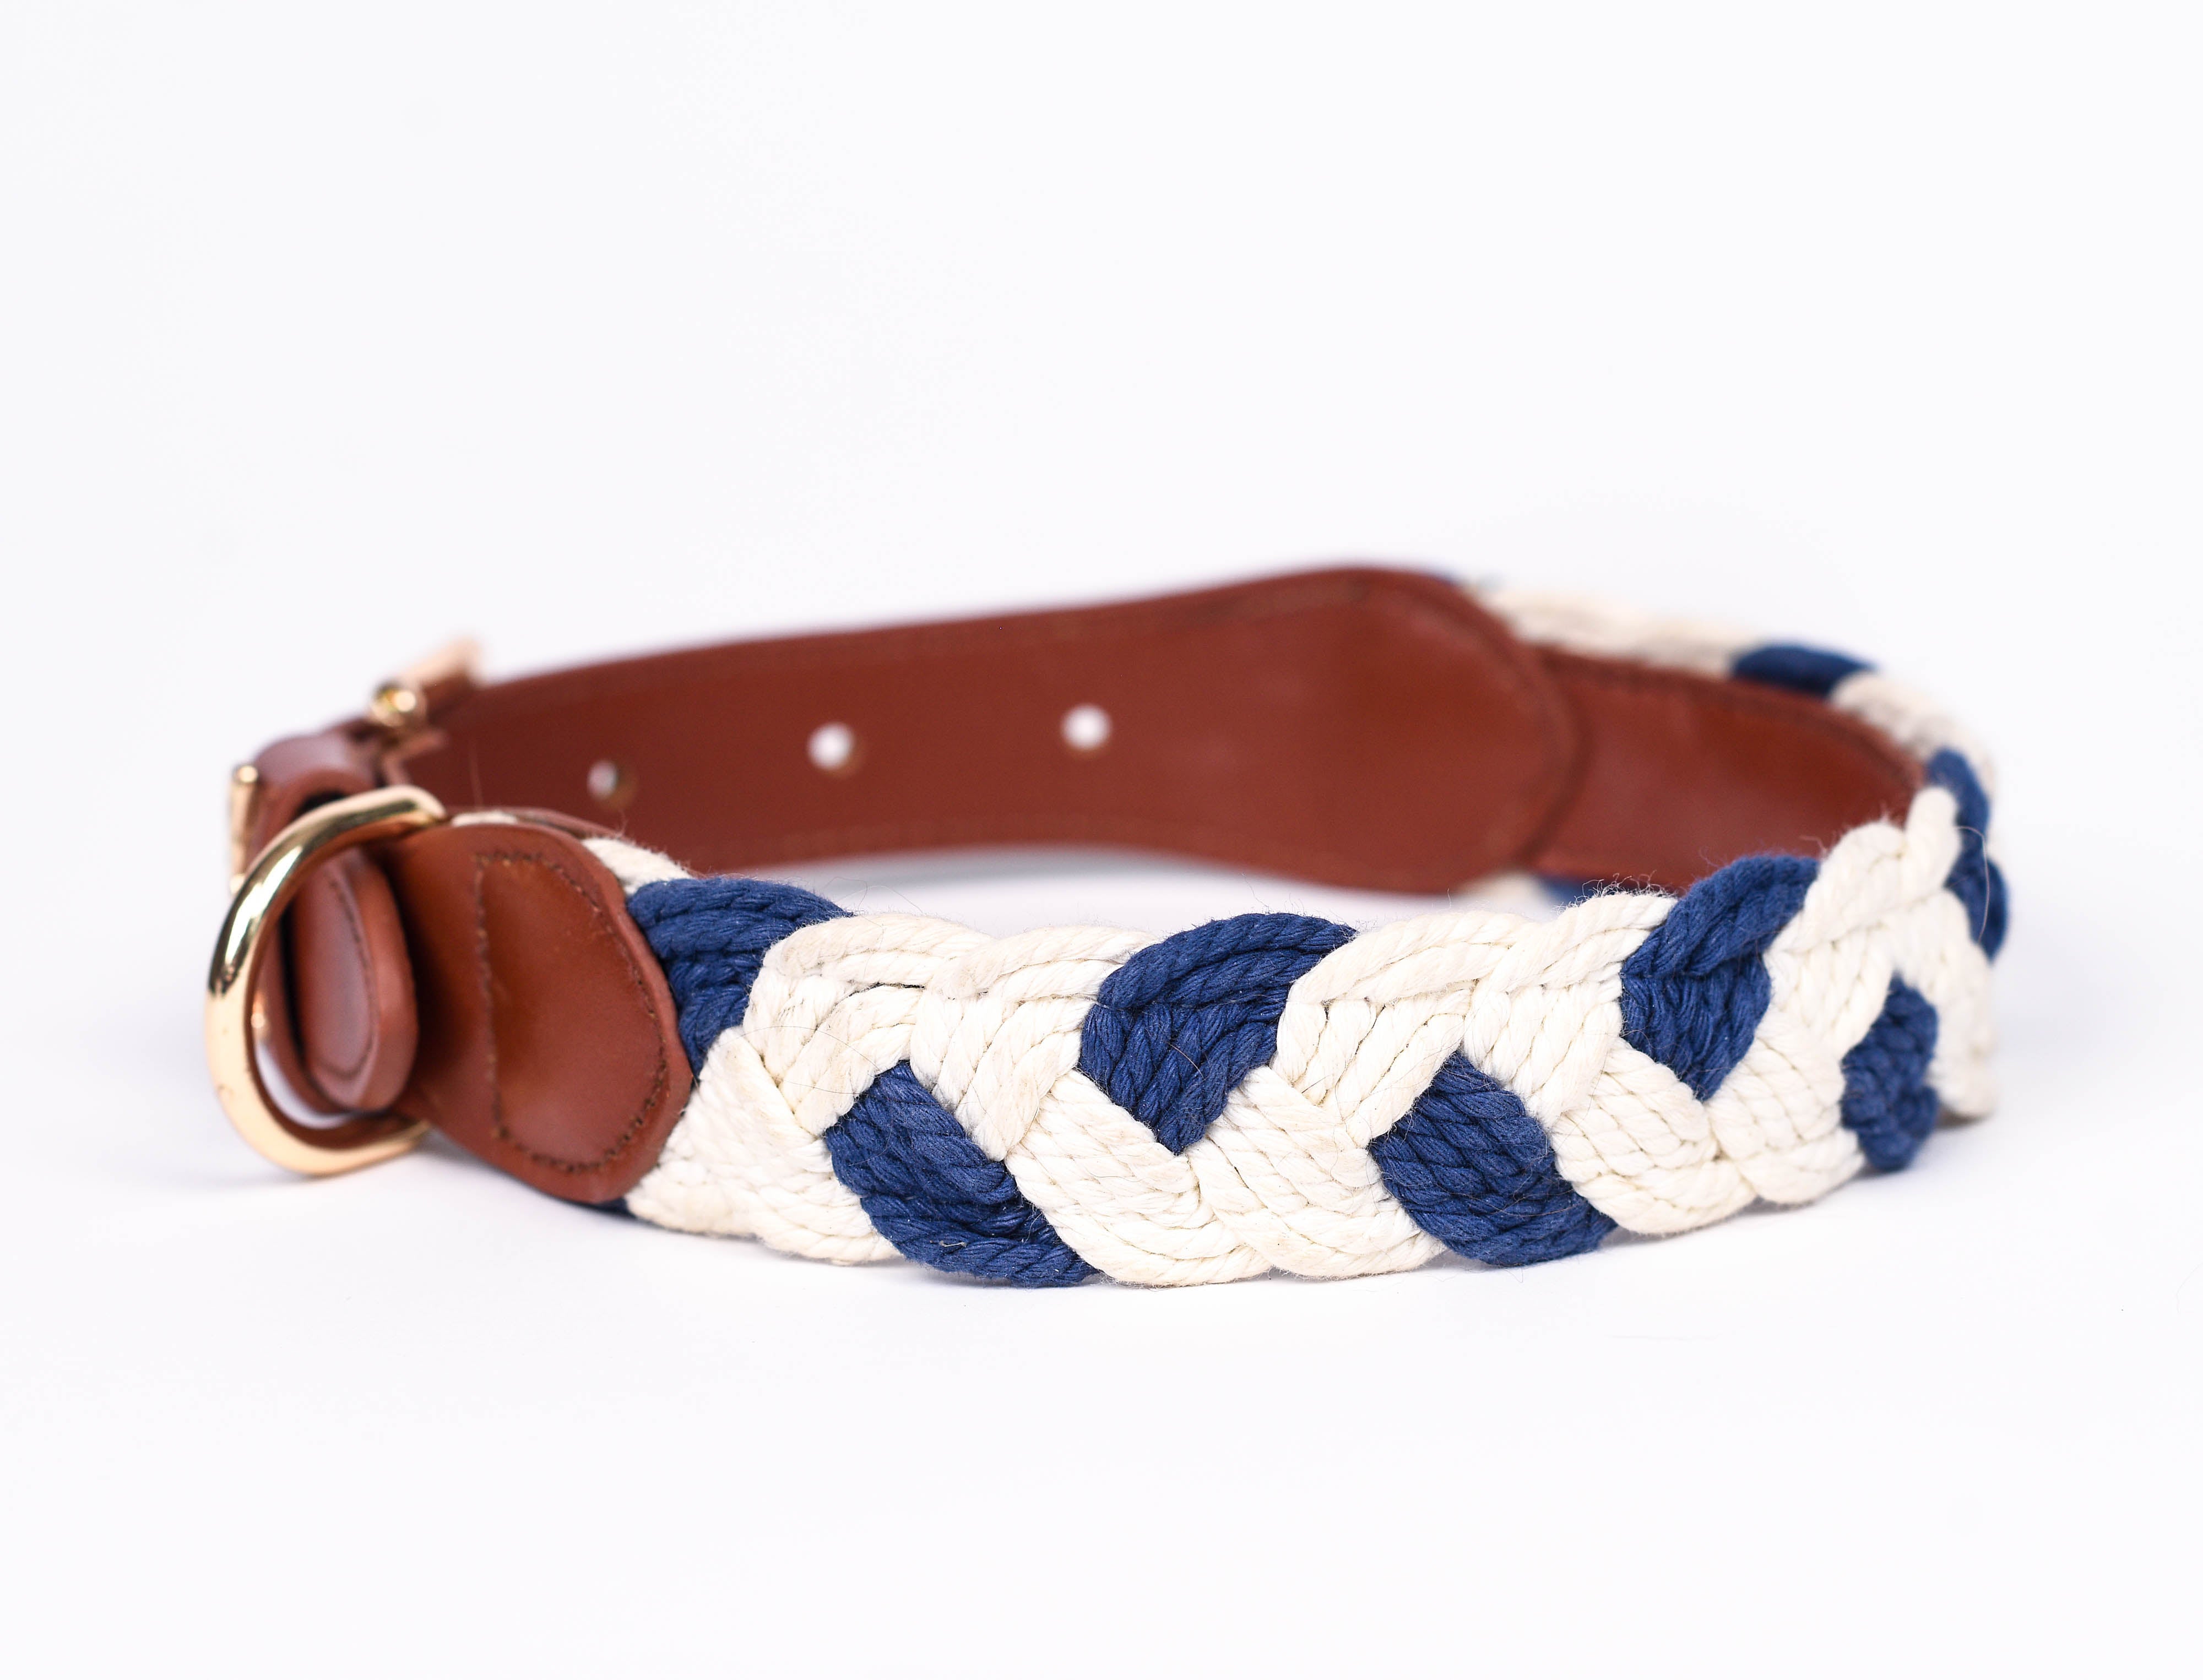 Nautical Knot Rope Lanyard in Natural White - Helm & Harbor - Dog leashes,  dog collars, nautical accessories and more - Helm and Harbor